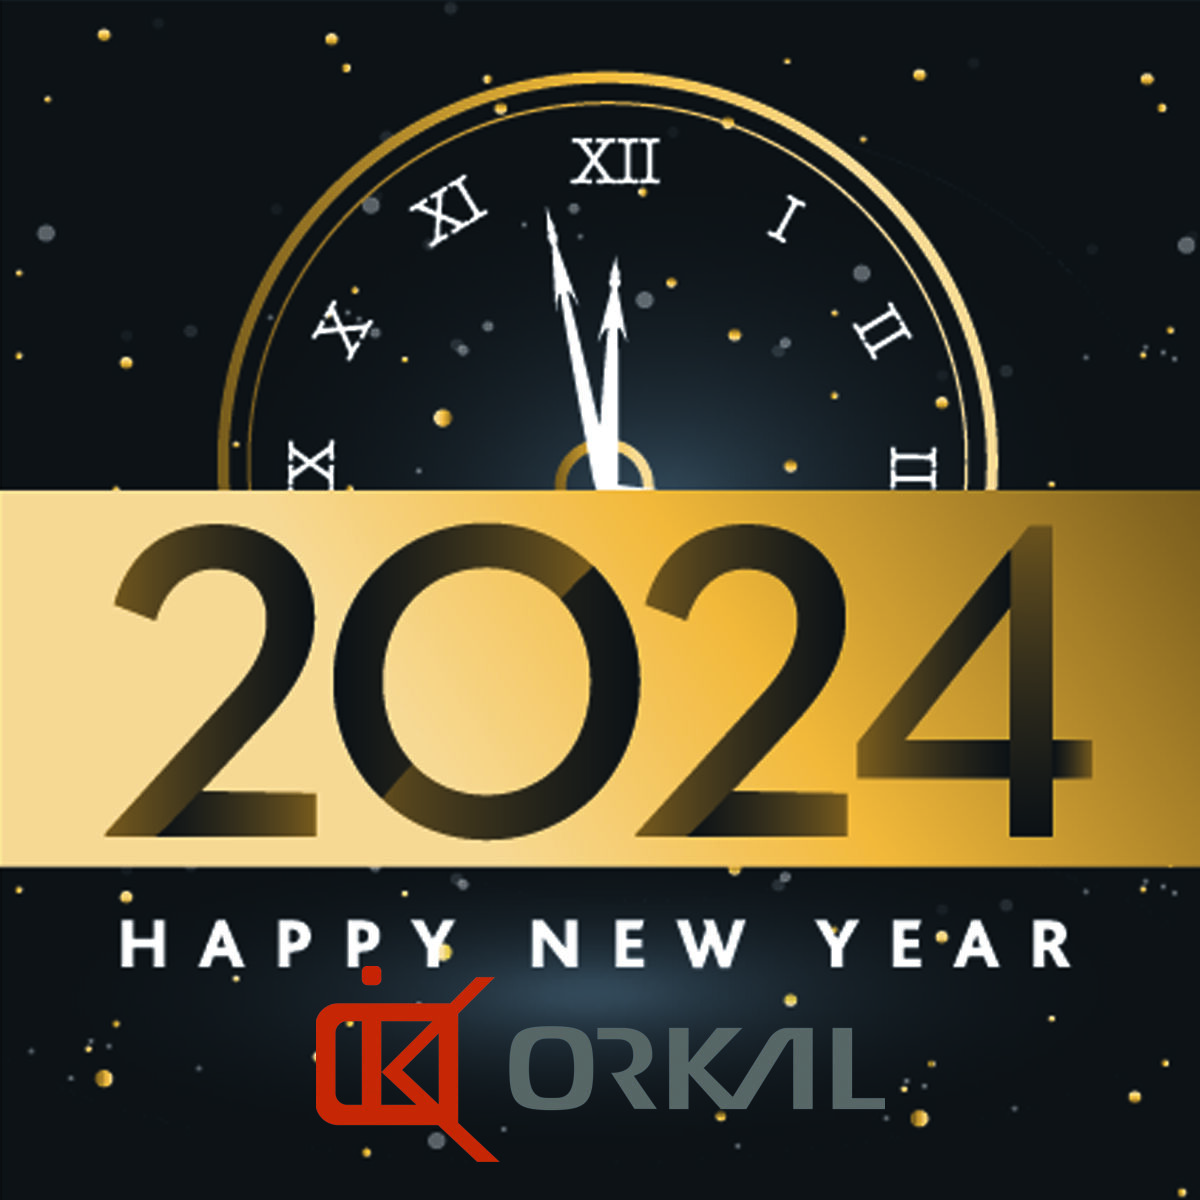 new year 2024 celebration image featuring a clock striking midnight and text reading "happy new year 2024" with festive background.